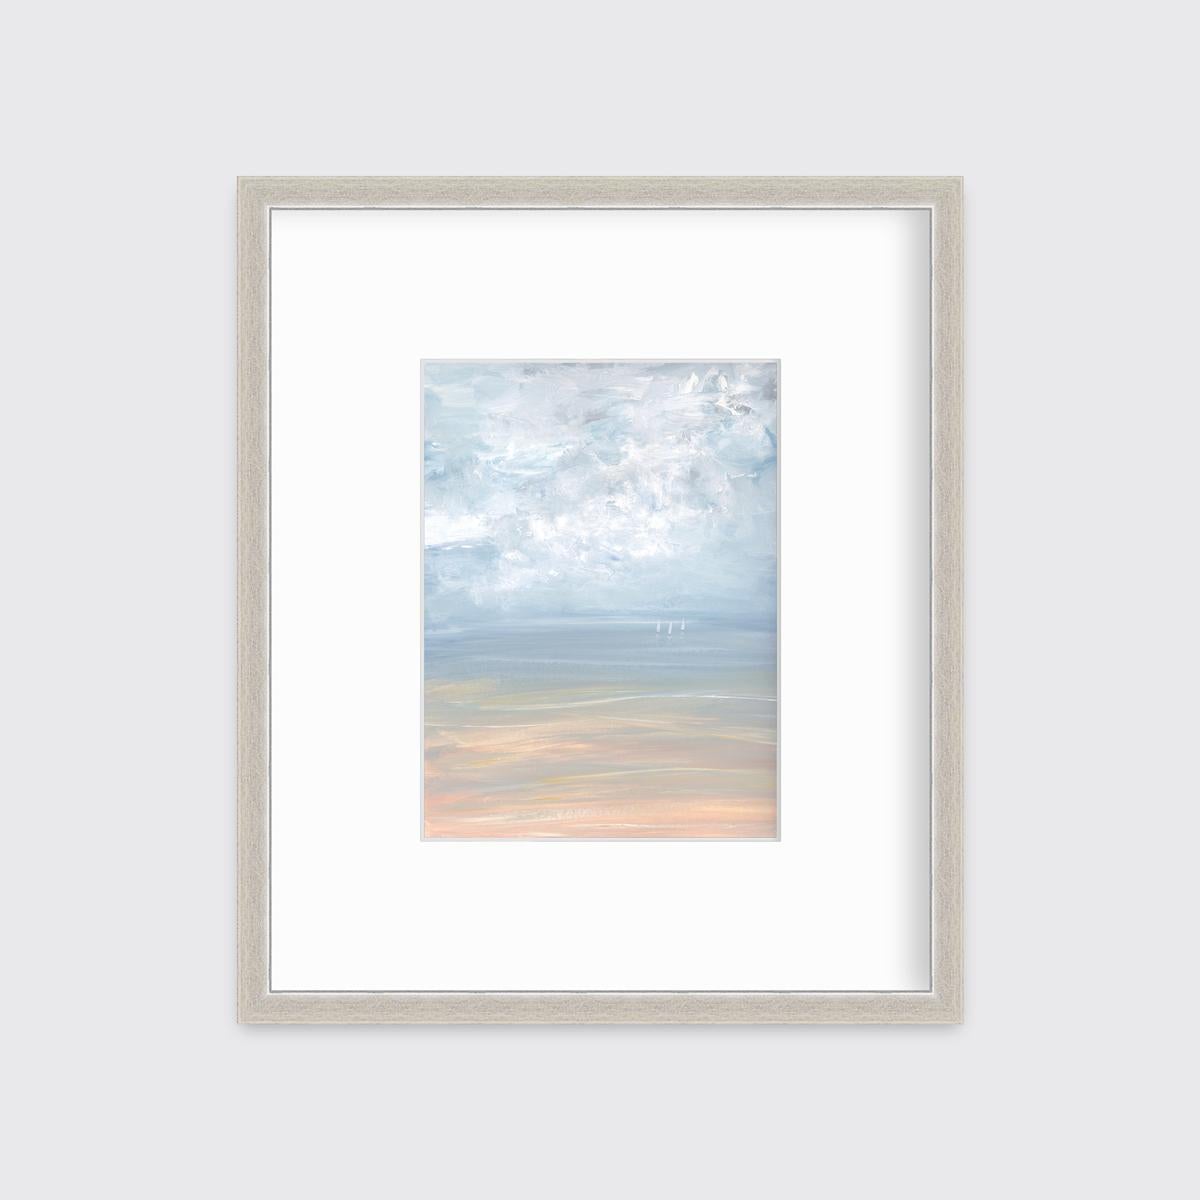 S. Cora Aldo Landscape Print - "Early Morning, " Framed Limited Edition Giclee Print, 8" x 6"